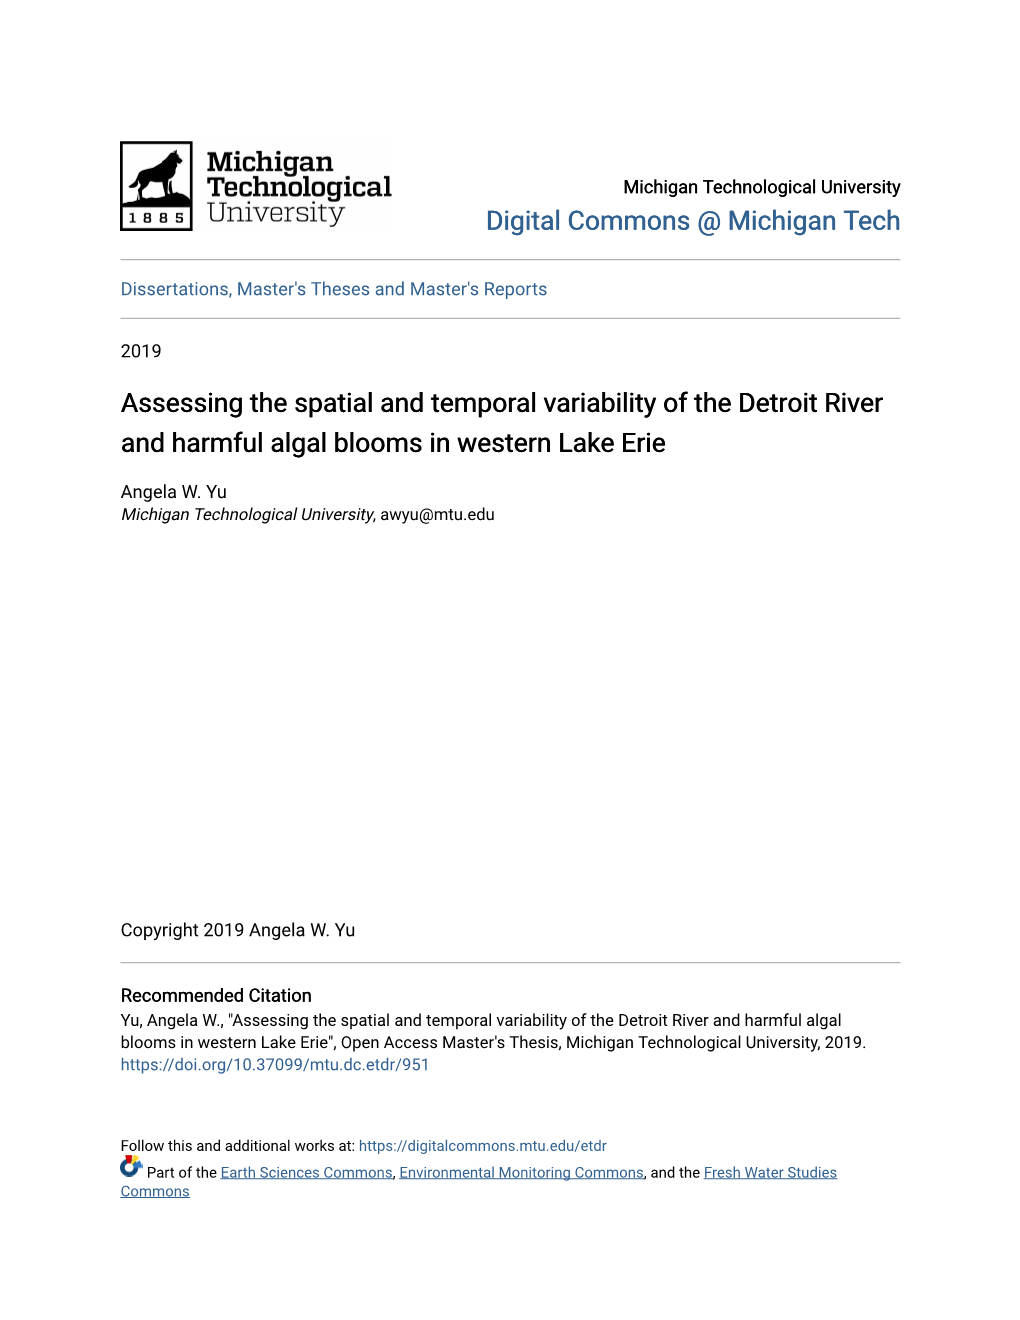 Assessing the Spatial and Temporal Variability of the Detroit River and Harmful Algal Blooms in Western Lake Erie